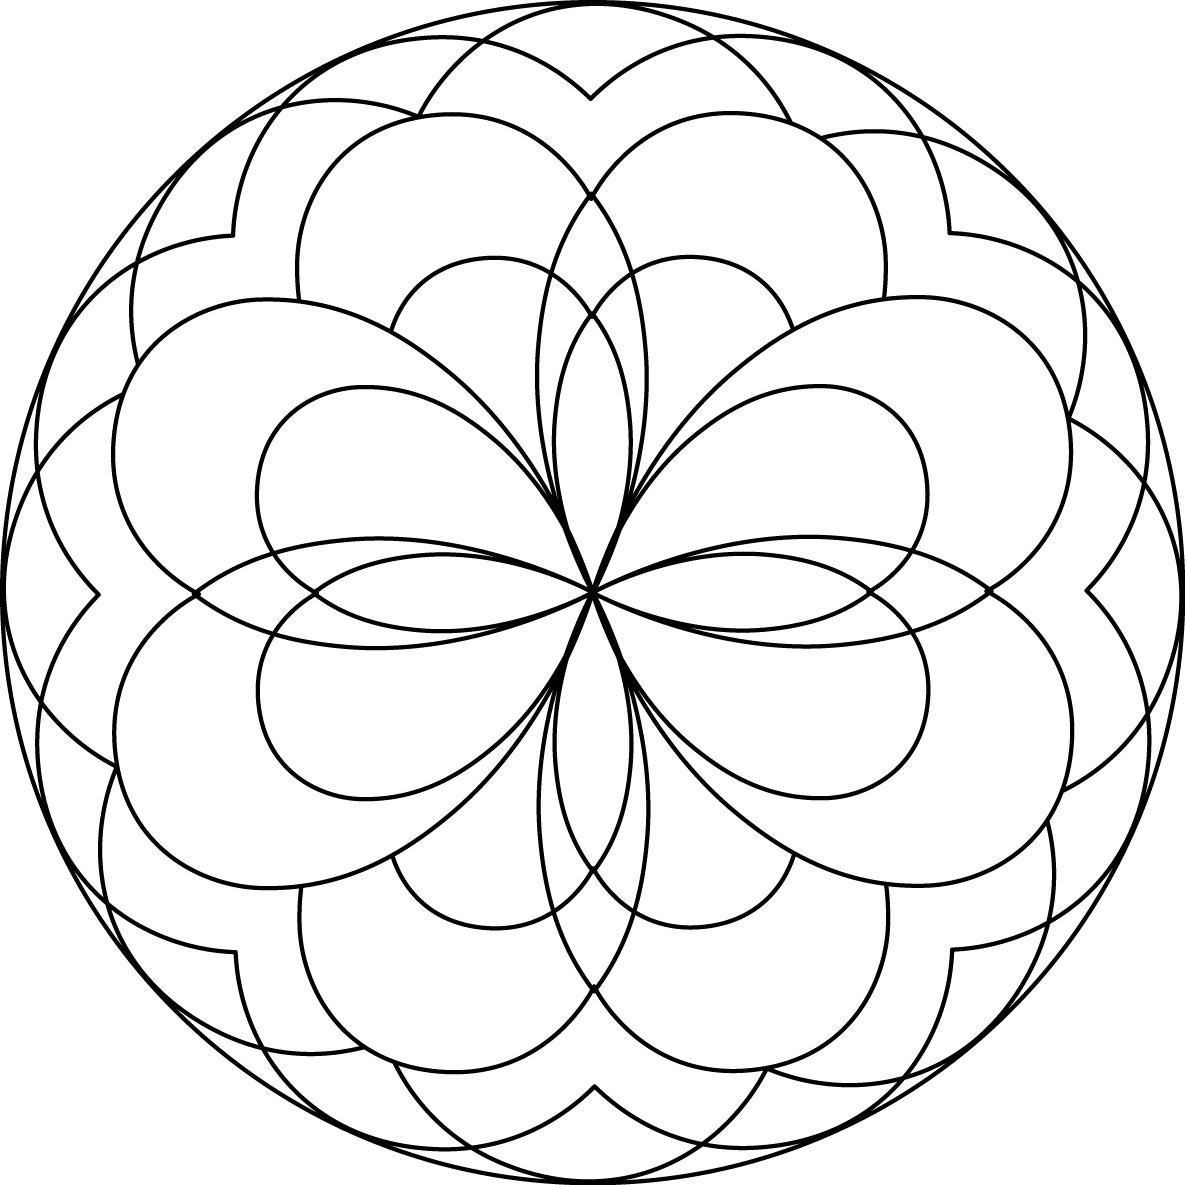 Mandala coloring pages for kids to download and print for free